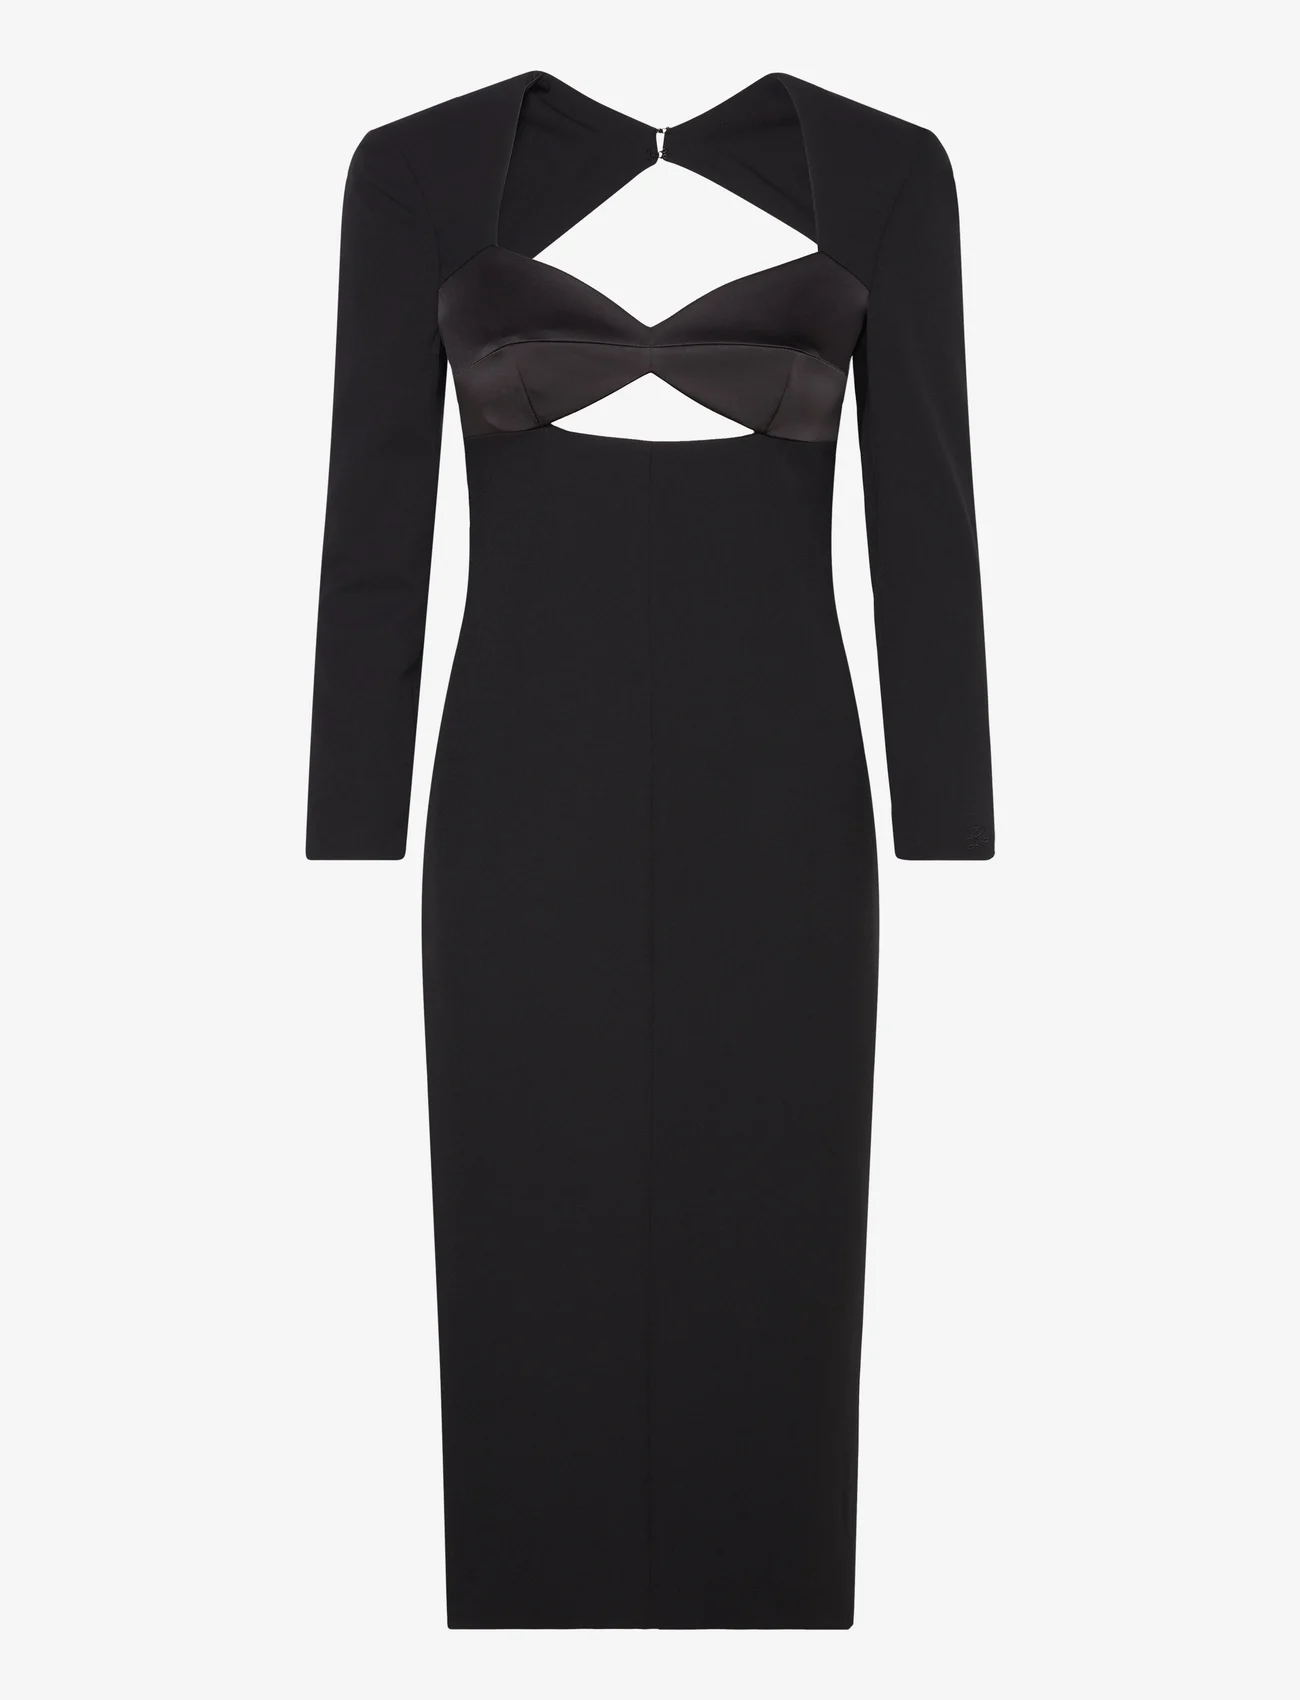 Karl Lagerfeld - evening cut out dress - party wear at outlet prices - black - 0